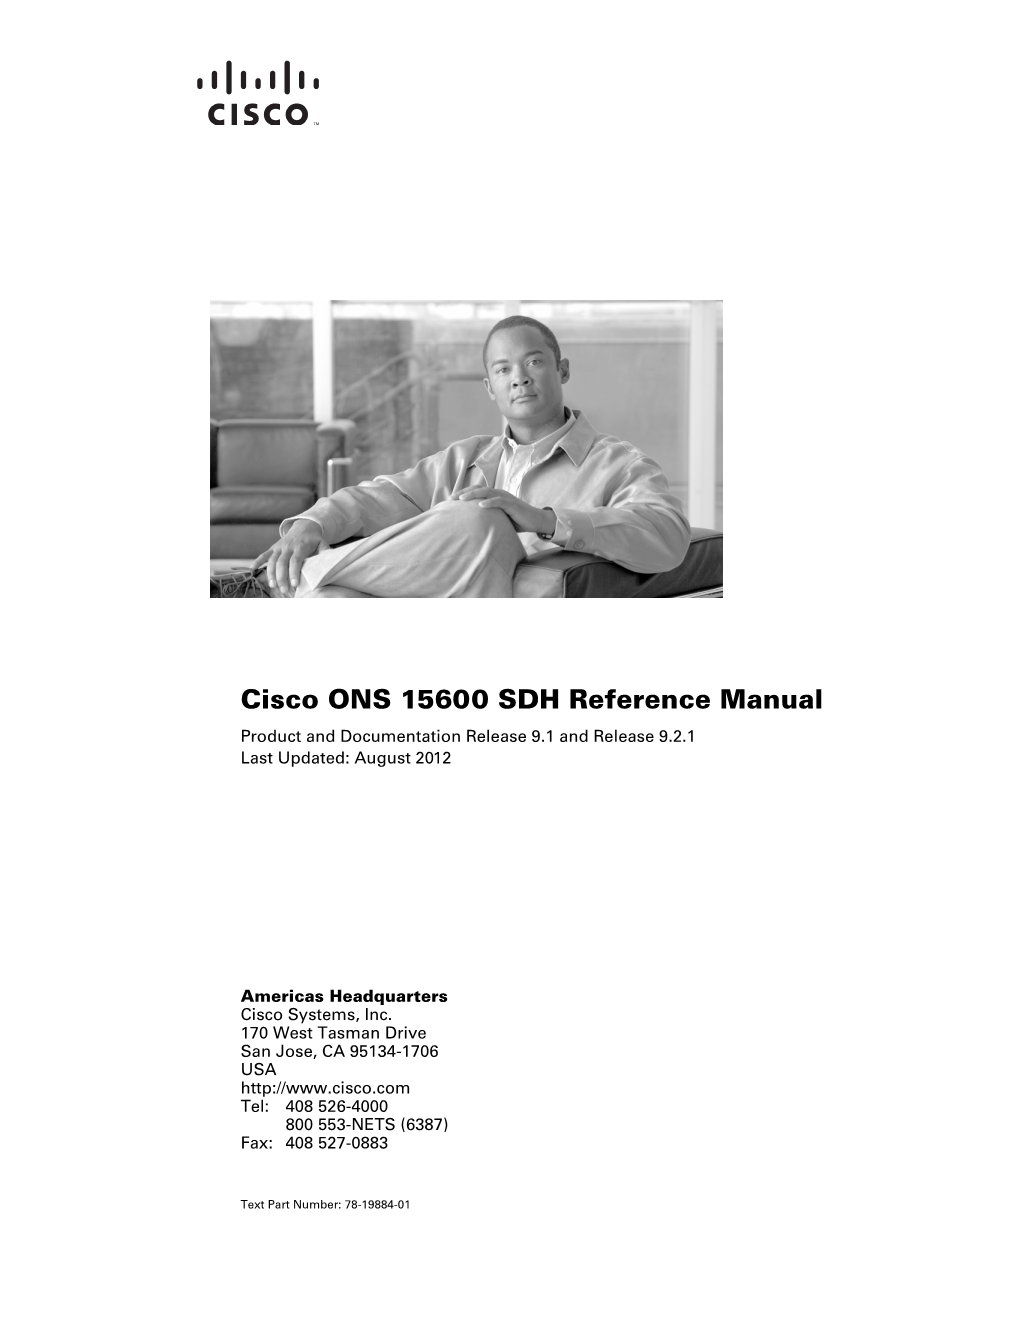 Cisco ONS 15600 SDH Reference Manual, Releases 9.1 and 9.2.1 © 2002 – 2012 Cisco Systems, Inc